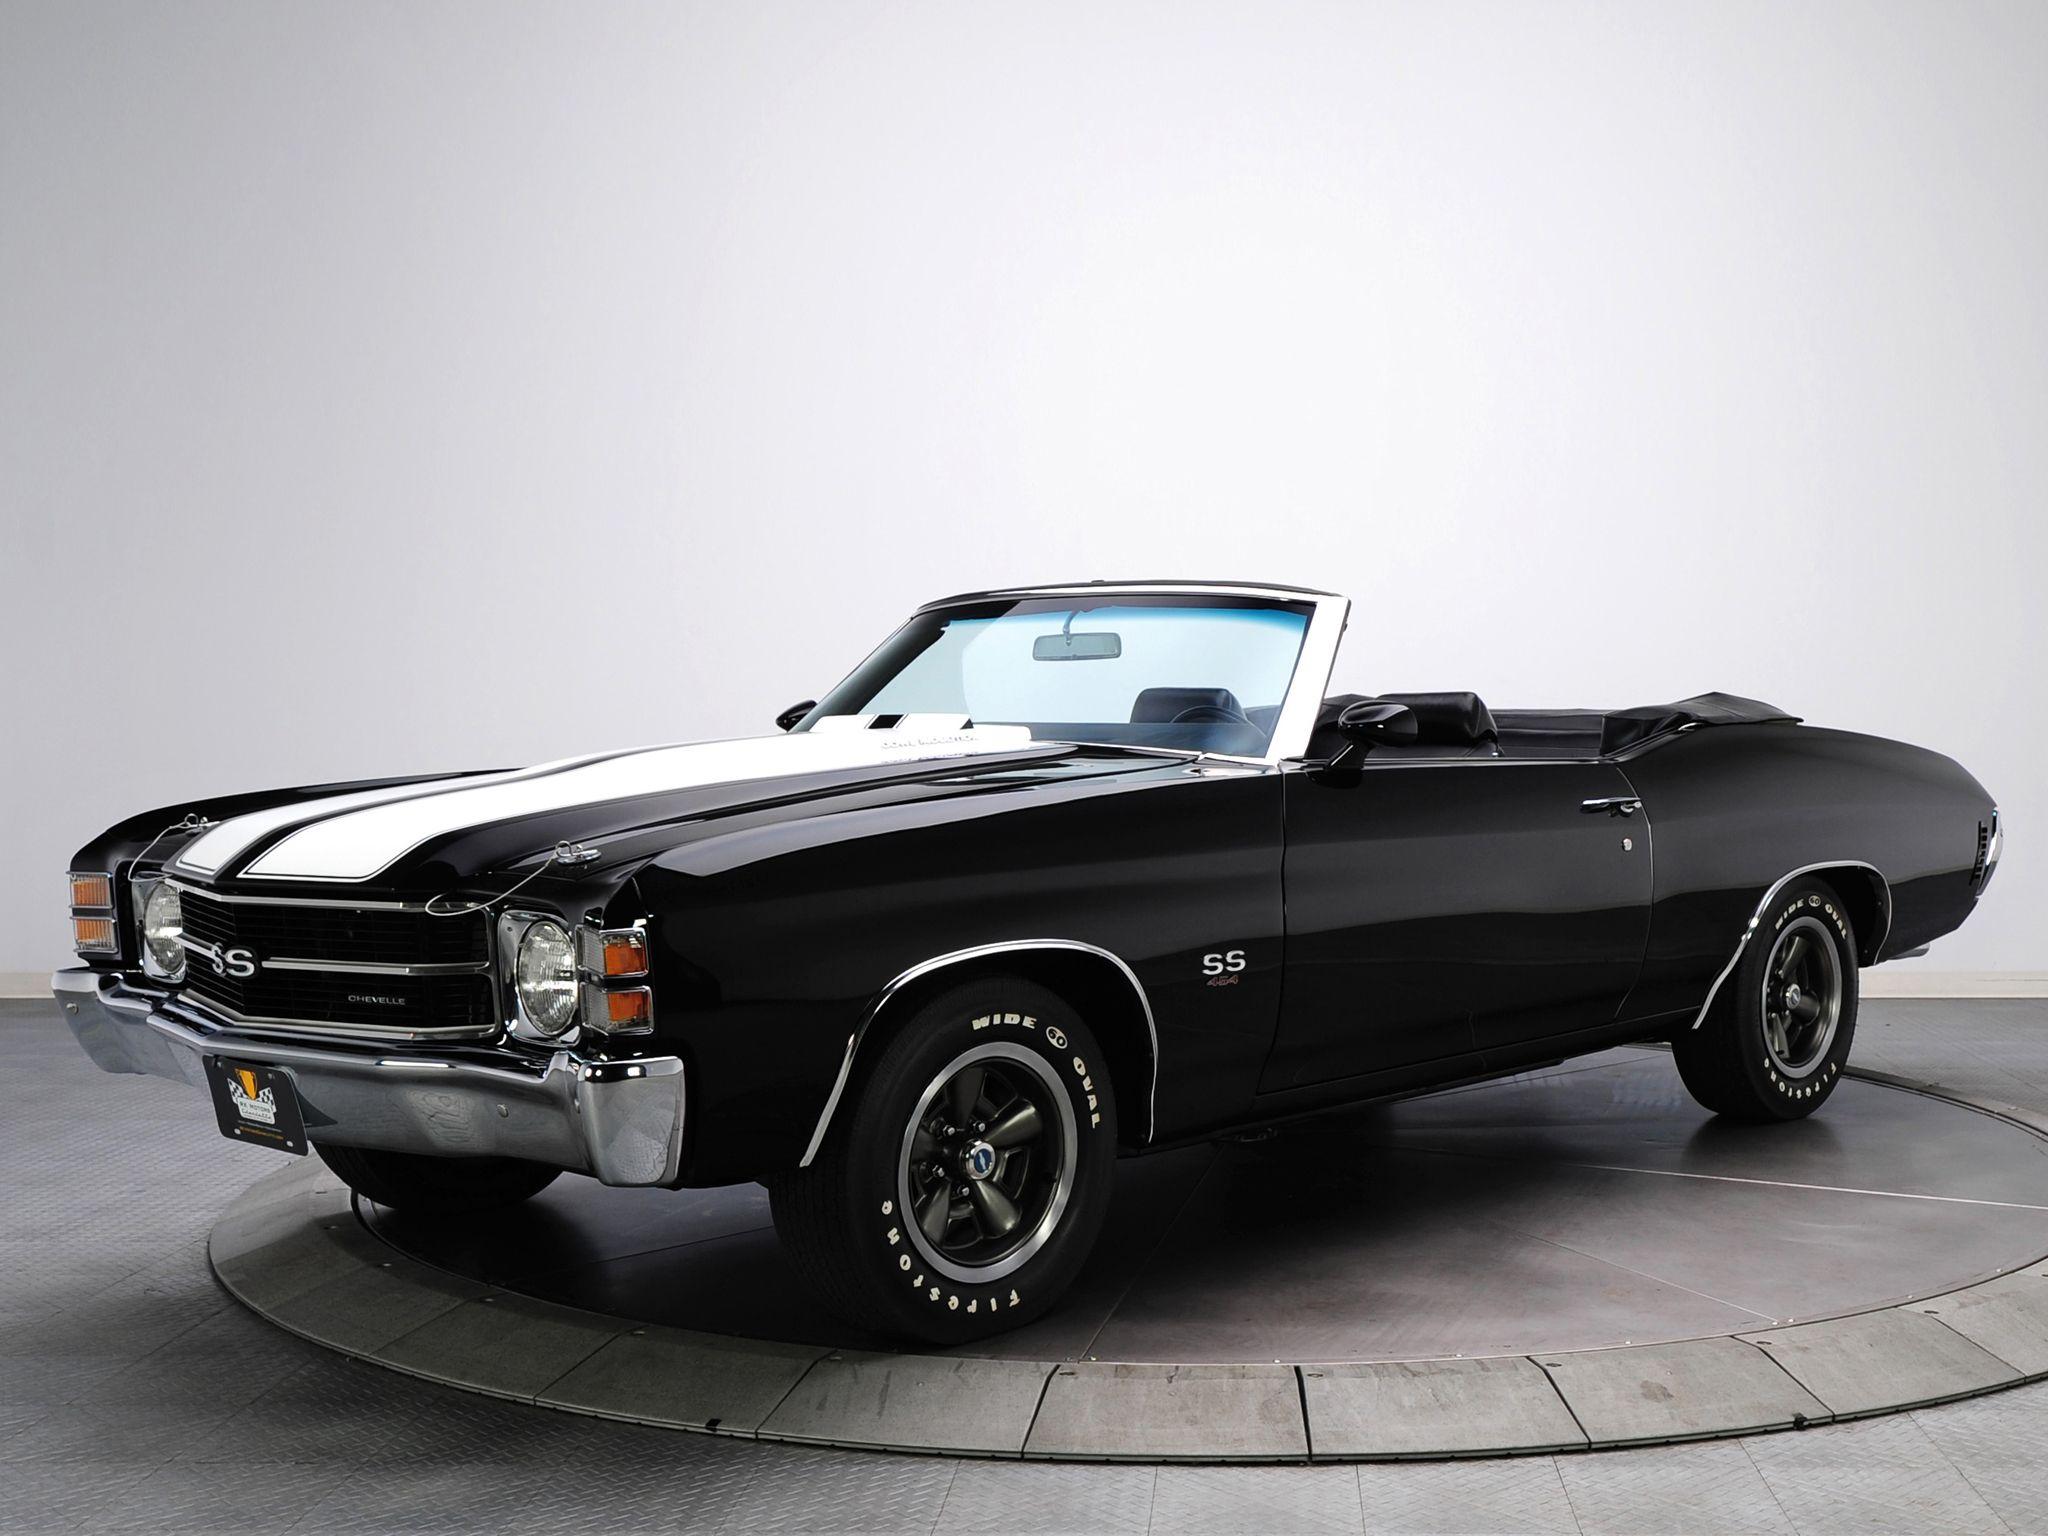 Chevrolet Chevelle SS 454 picture # 91956. Chevrolet photo gallery